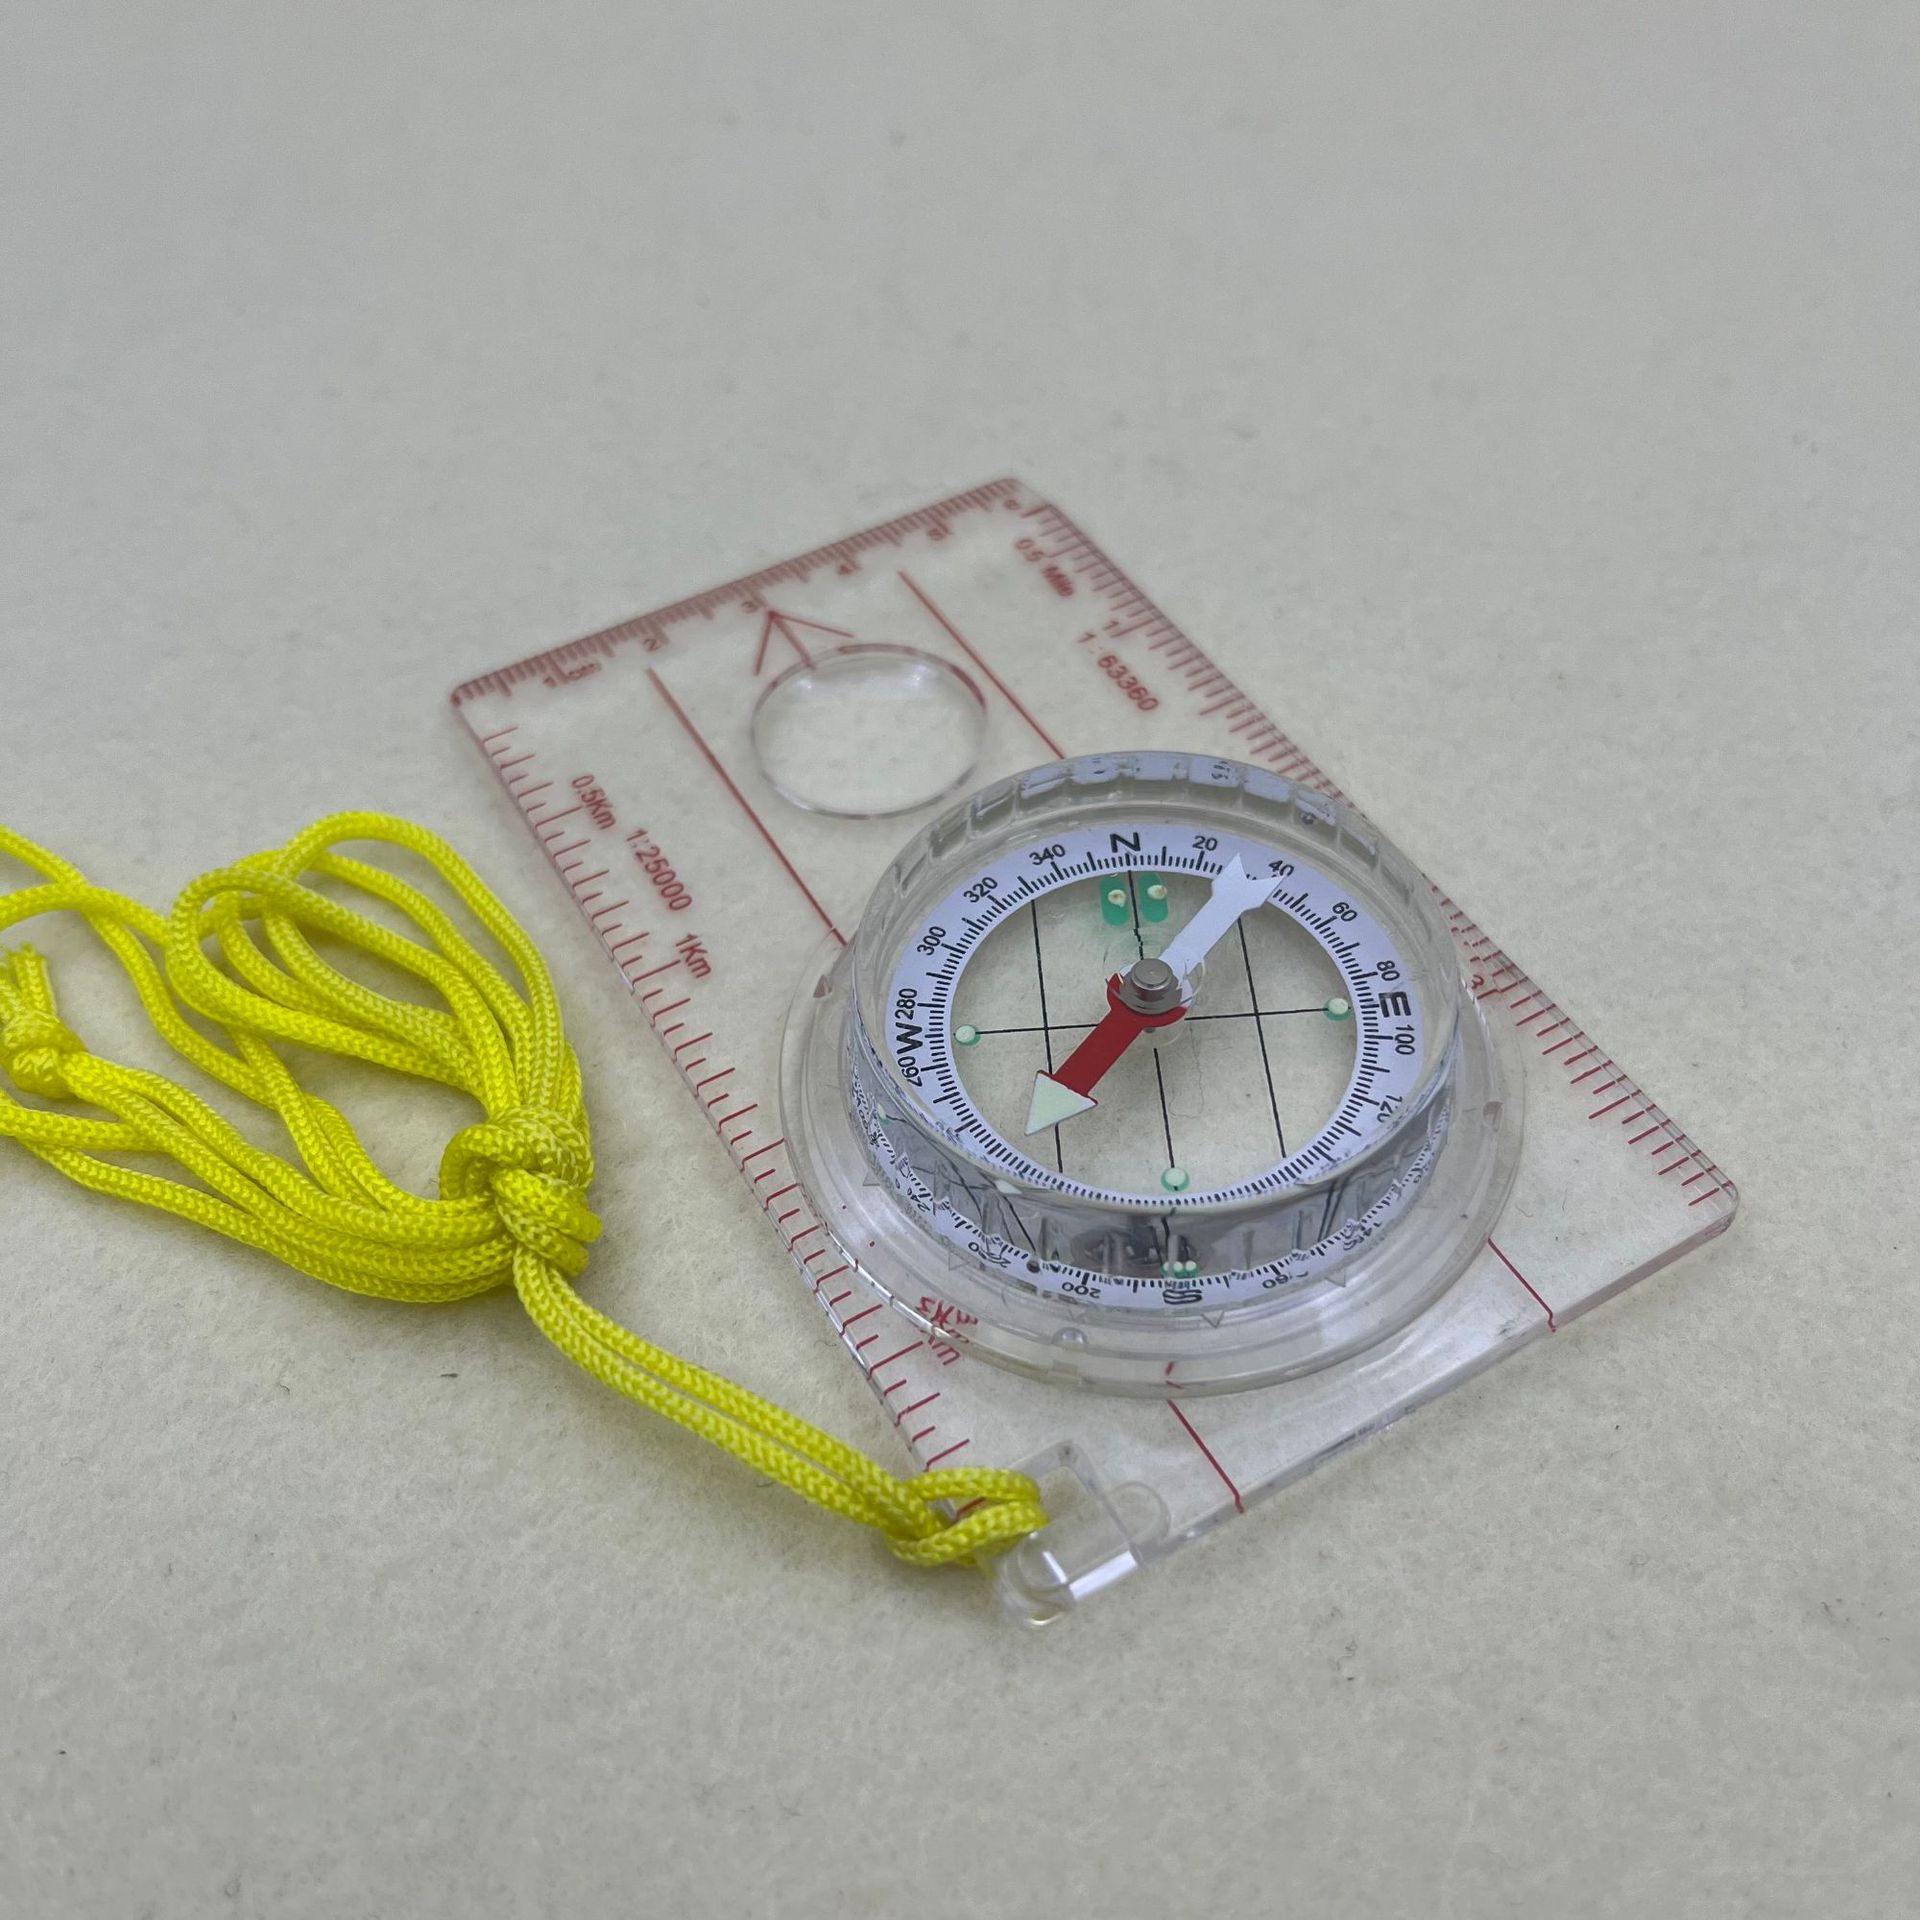 New Outdoor Multifunctional Transparent Ruler Compass Plastic Compass for Students Gift Compass